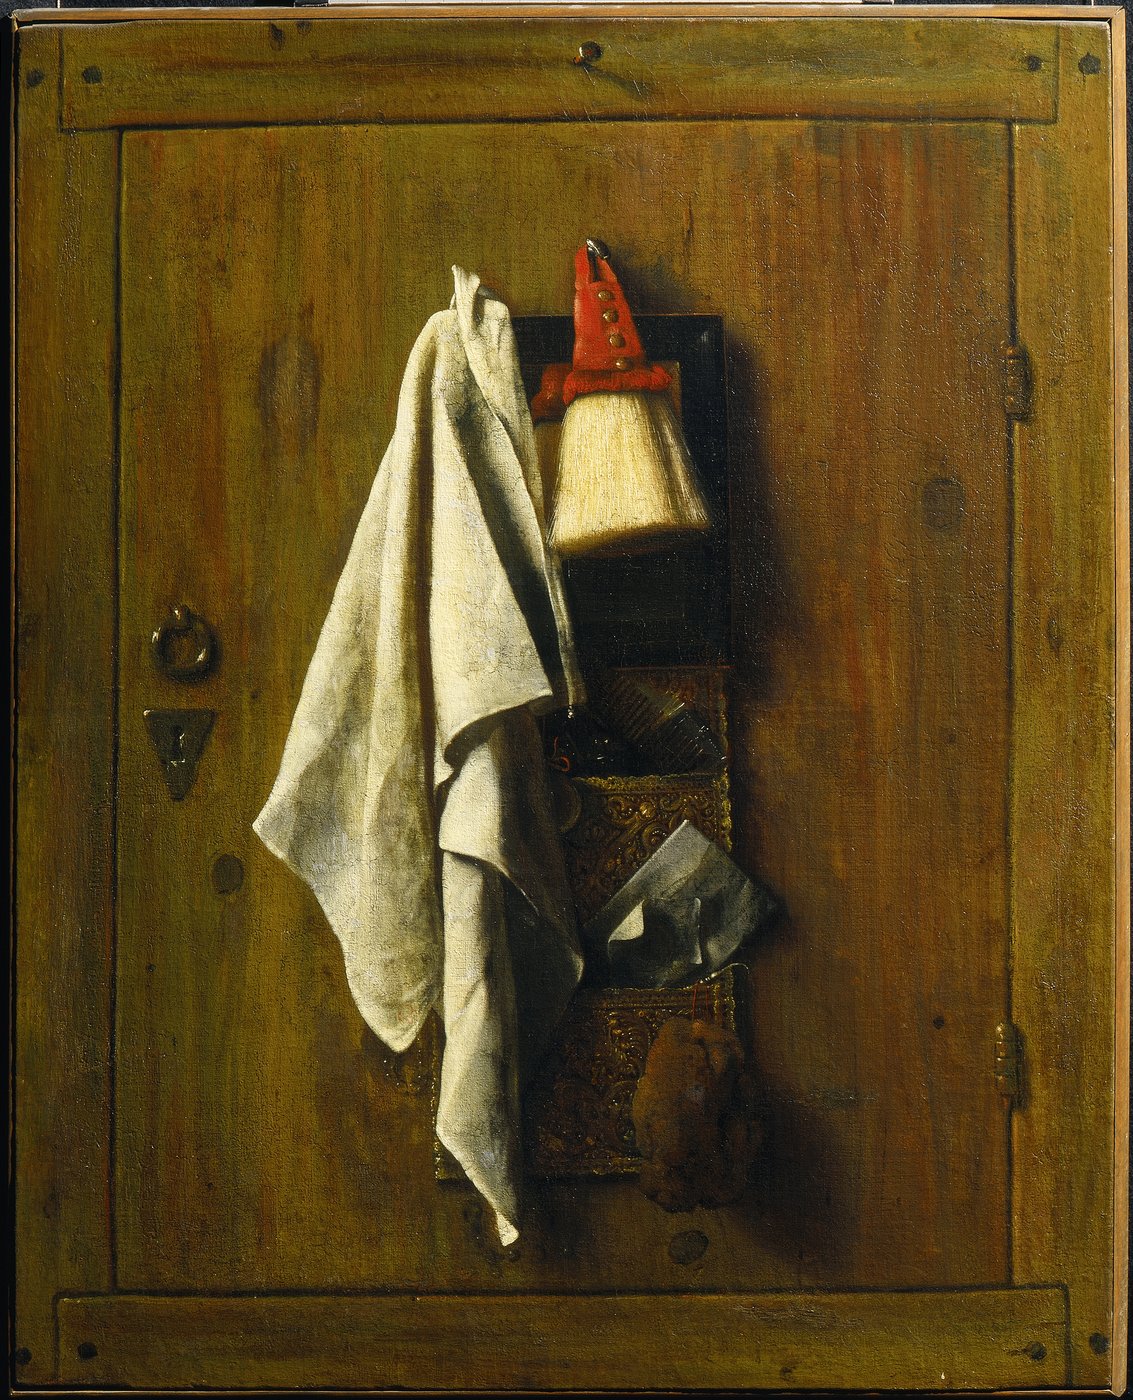 Painting of a wooden door on which hangs a toilet bag with comb, beard brush, sponge and other utensils, next to it hangs a white cloth towel.